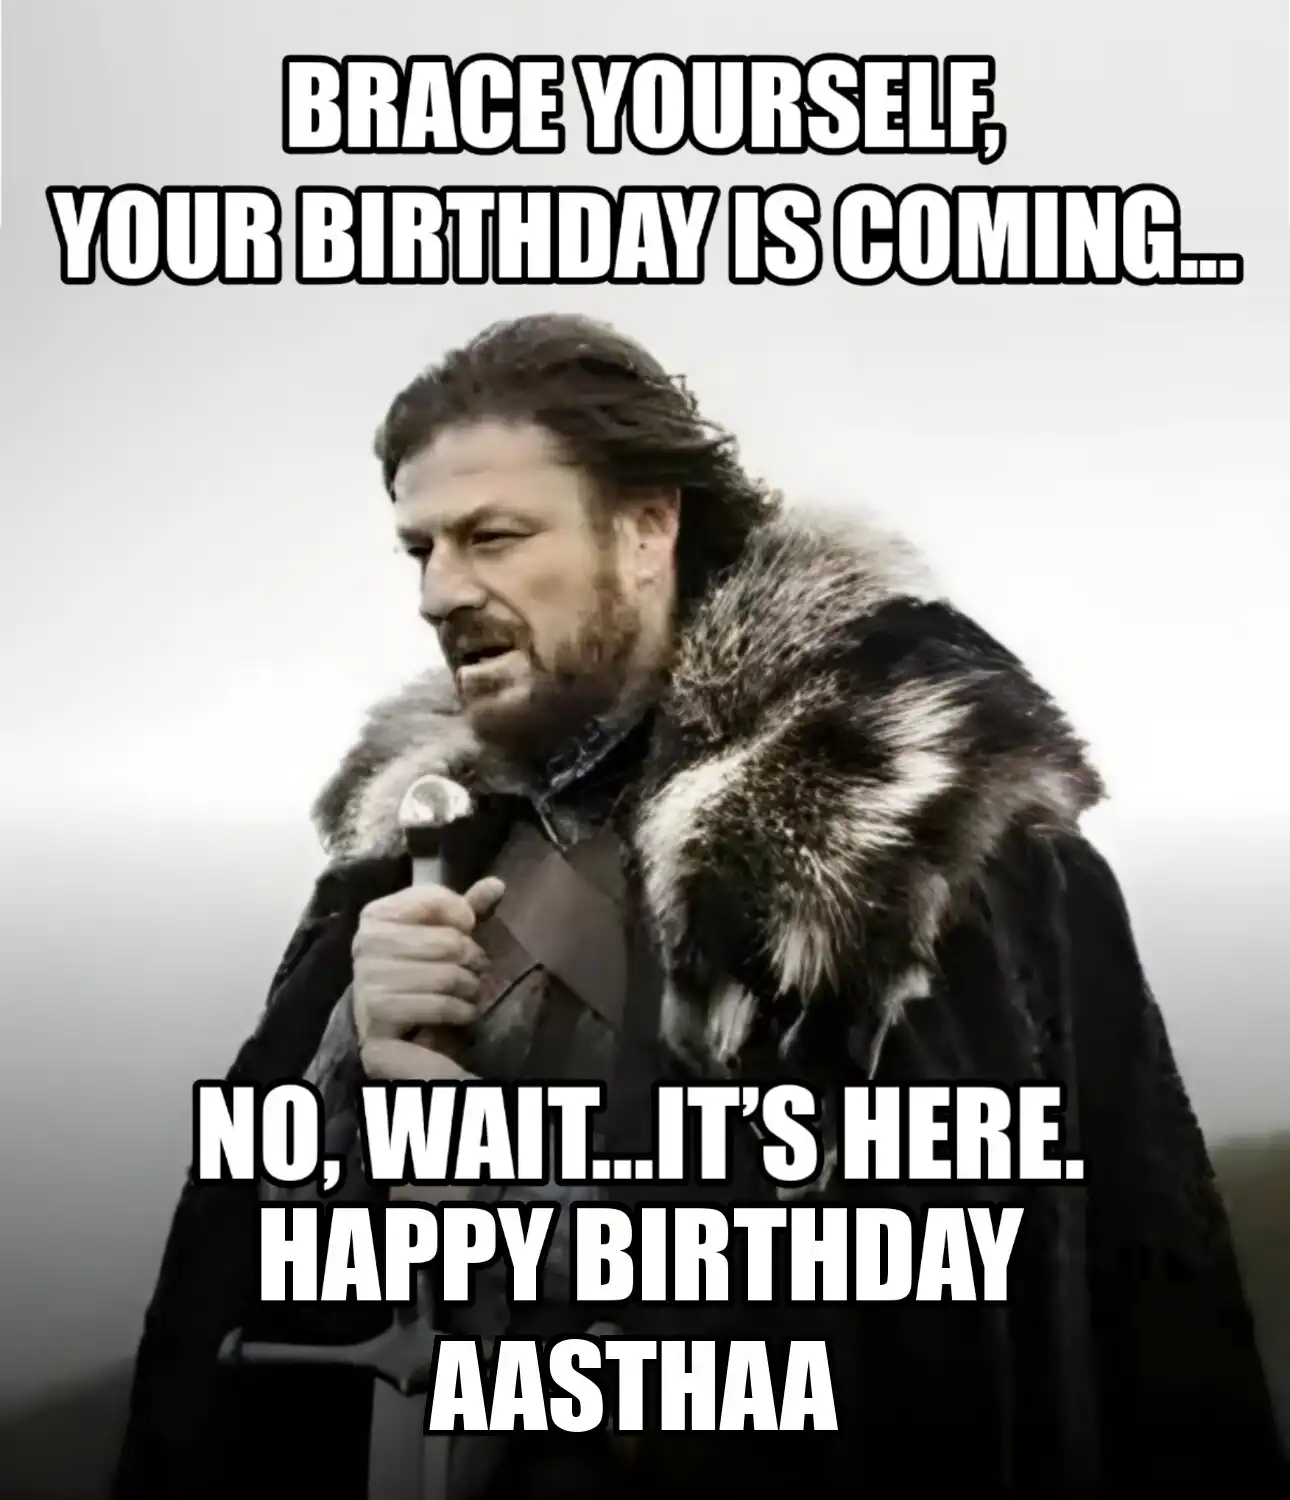 Happy Birthday Aasthaa Brace Yourself Your Birthday Is Coming Meme